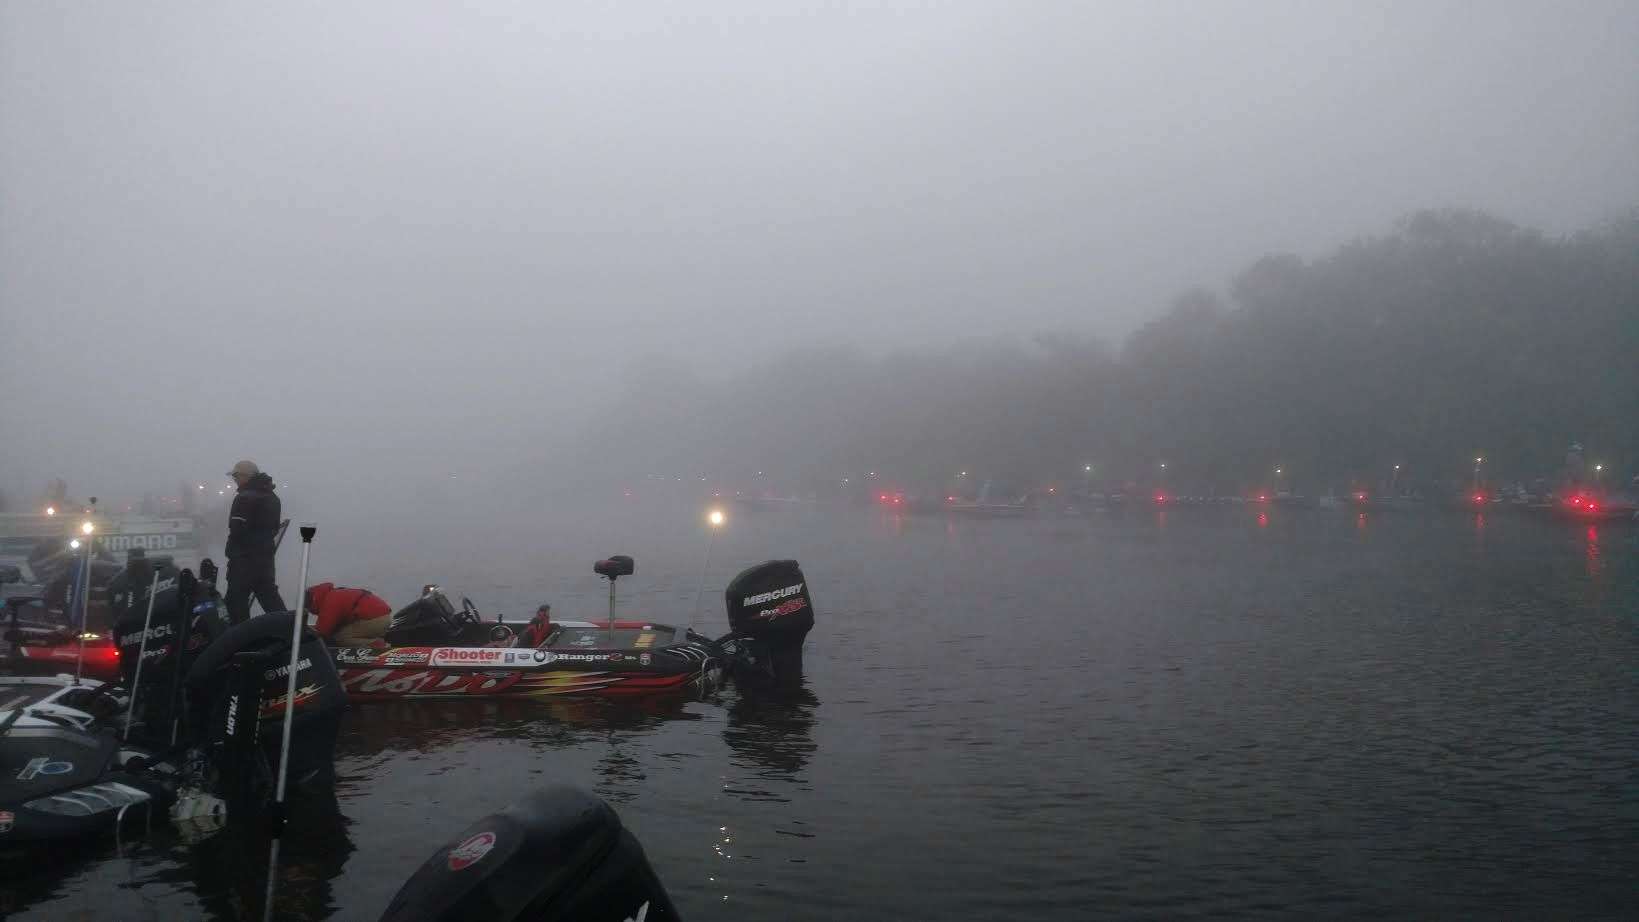 Fog delay at Okeechobee but anglers remain in great spirits. 